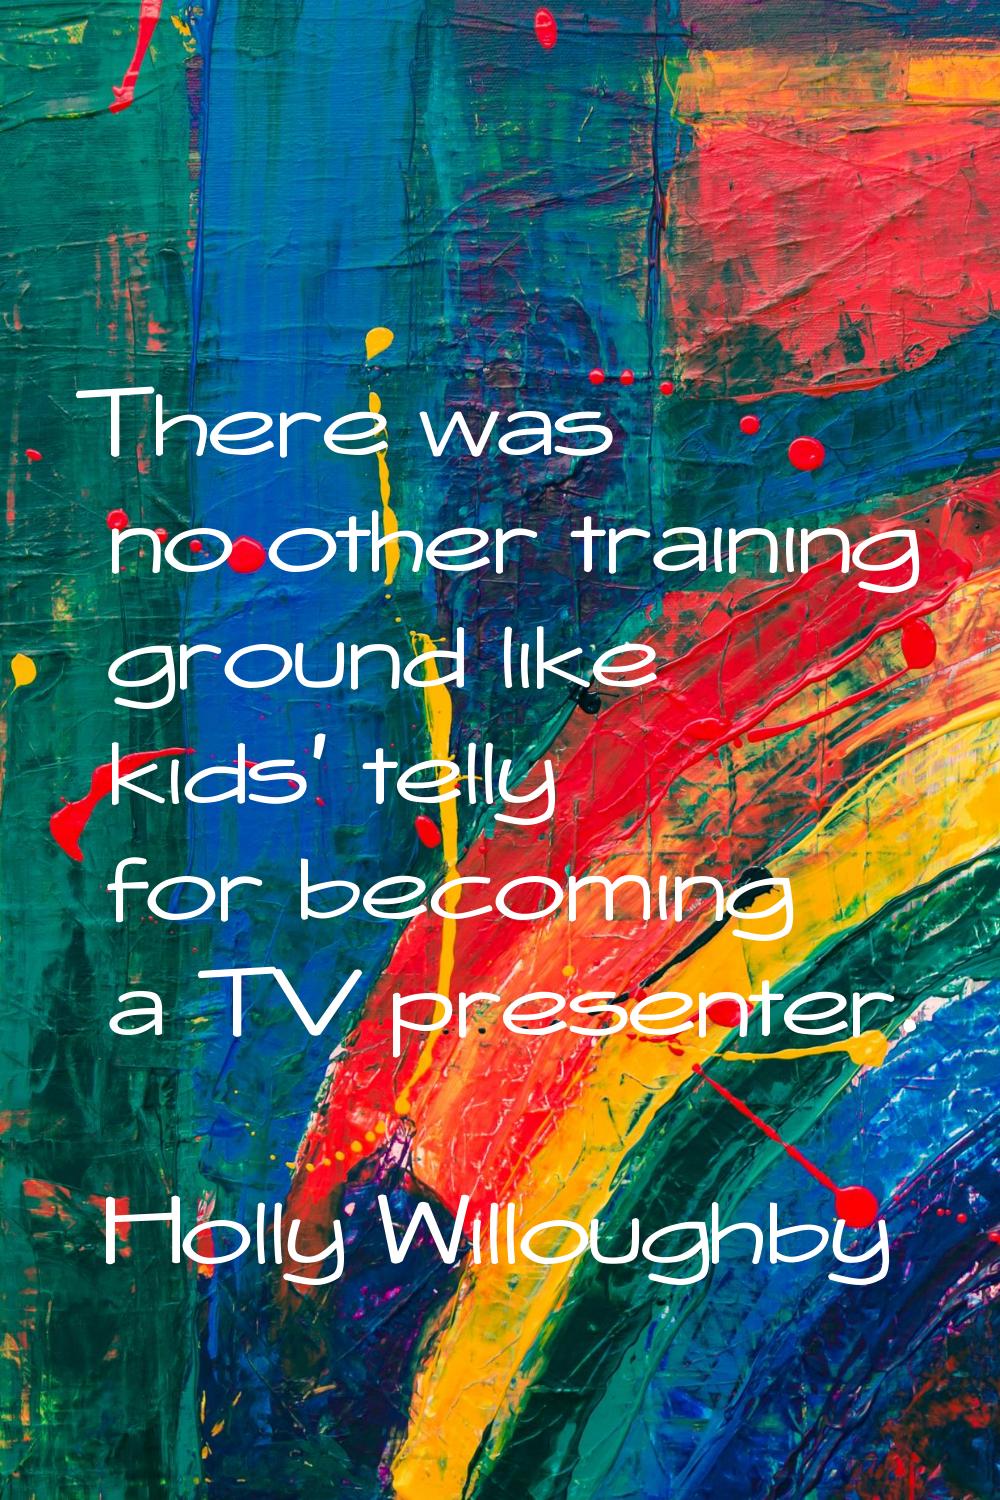 There was no other training ground like kids' telly for becoming a TV presenter.